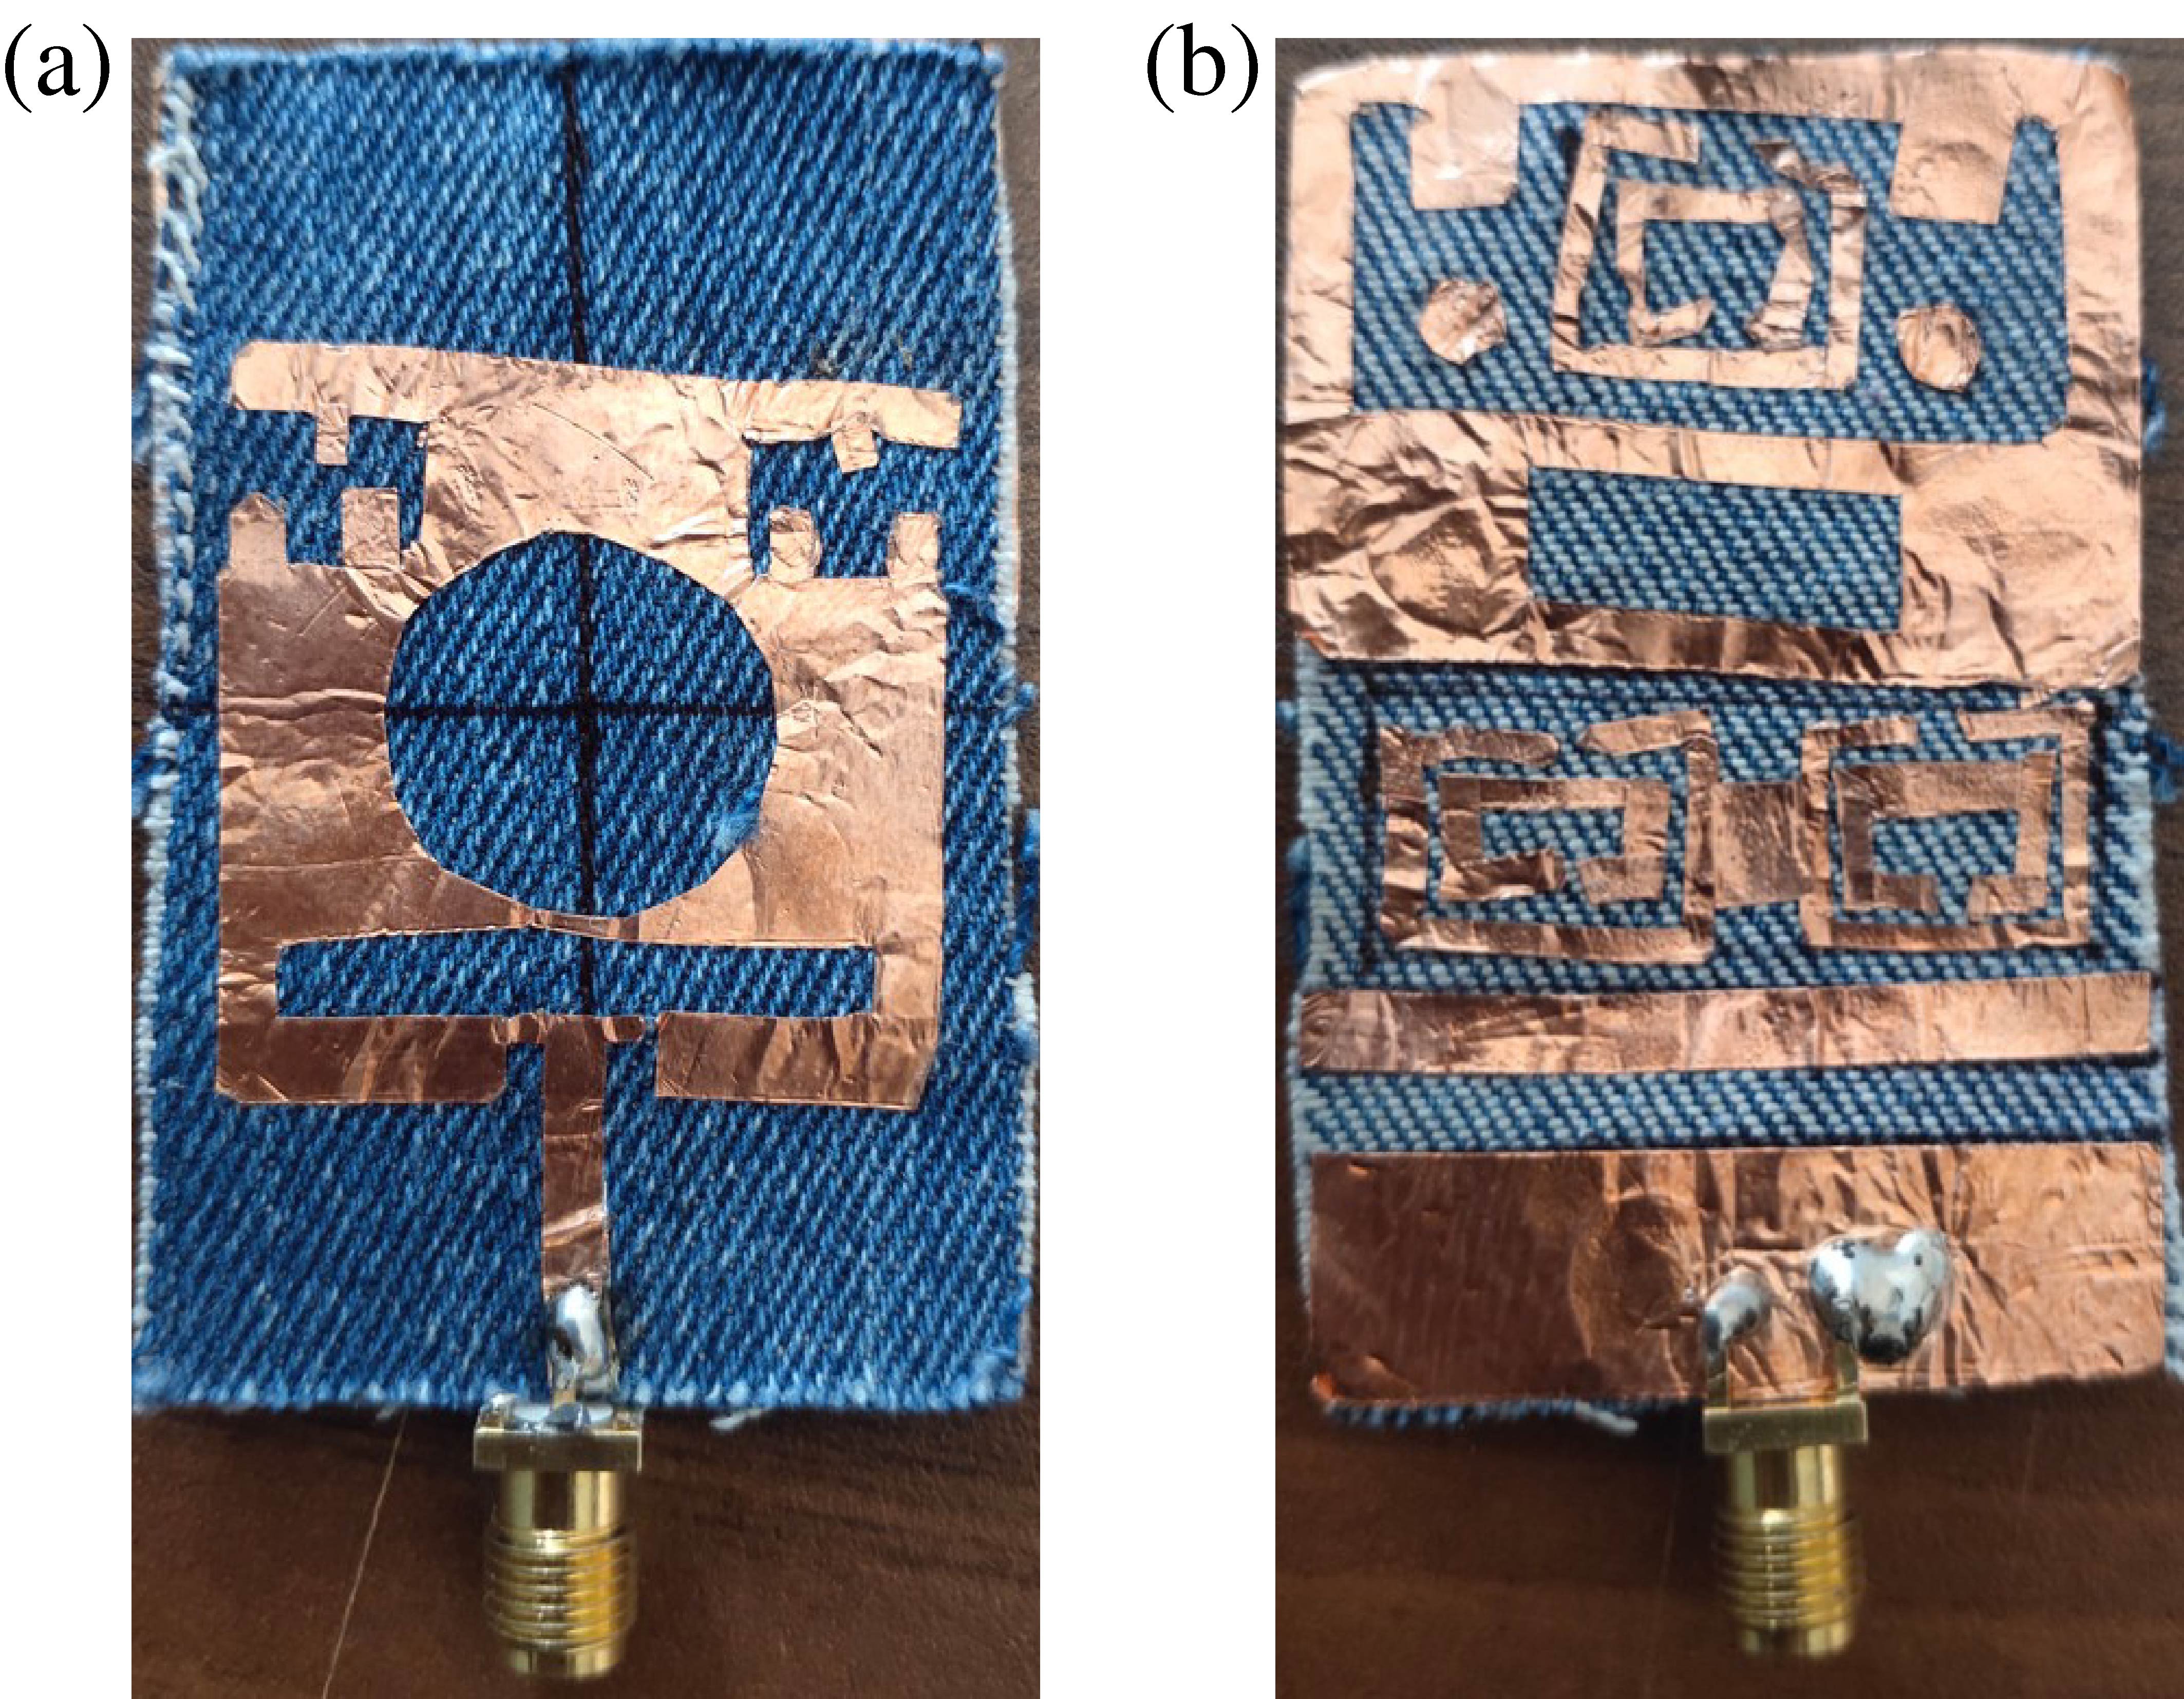 Flexible Microstrip Patch Antenna Design on Jeans Substrate Radiating at 2.45 GHz for WBAN Application